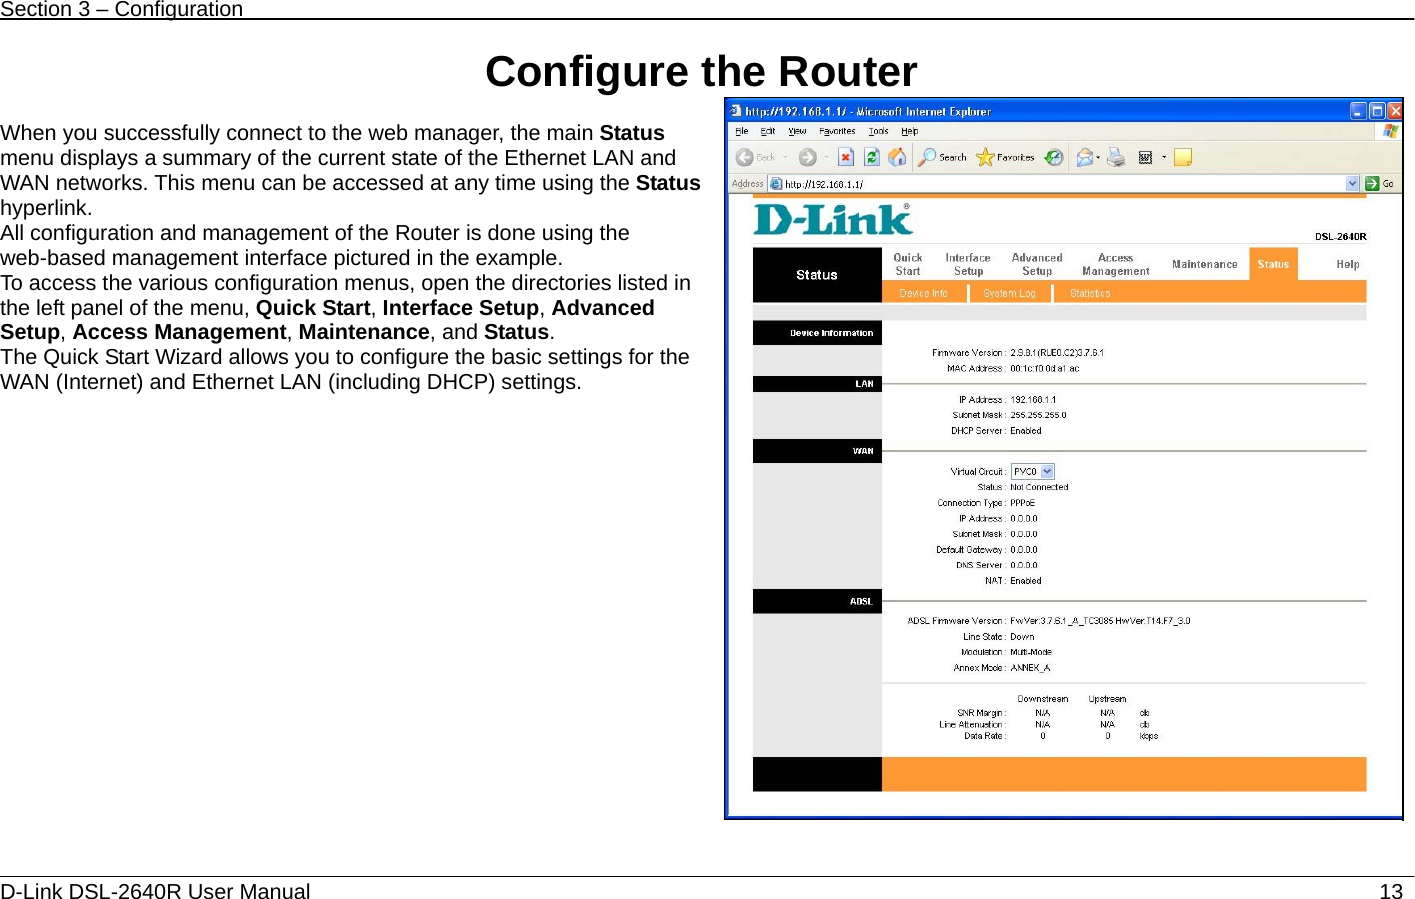 Section 3 – Configuration   D-Link DSL-2640R User Manual                           13Configure the Router  When you successfully connect to the web manager, the main Status menu displays a summary of the current state of the Ethernet LAN and WAN networks. This menu can be accessed at any time using the Status hyperlink. All configuration and management of the Router is done using the web-based management interface pictured in the example.   To access the various configuration menus, open the directories listed in the left panel of the menu, Quick Start, Interface Setup, Advanced Setup, Access Management, Maintenance, and Status.   The Quick Start Wizard allows you to configure the basic settings for the WAN (Internet) and Ethernet LAN (including DHCP) settings.  